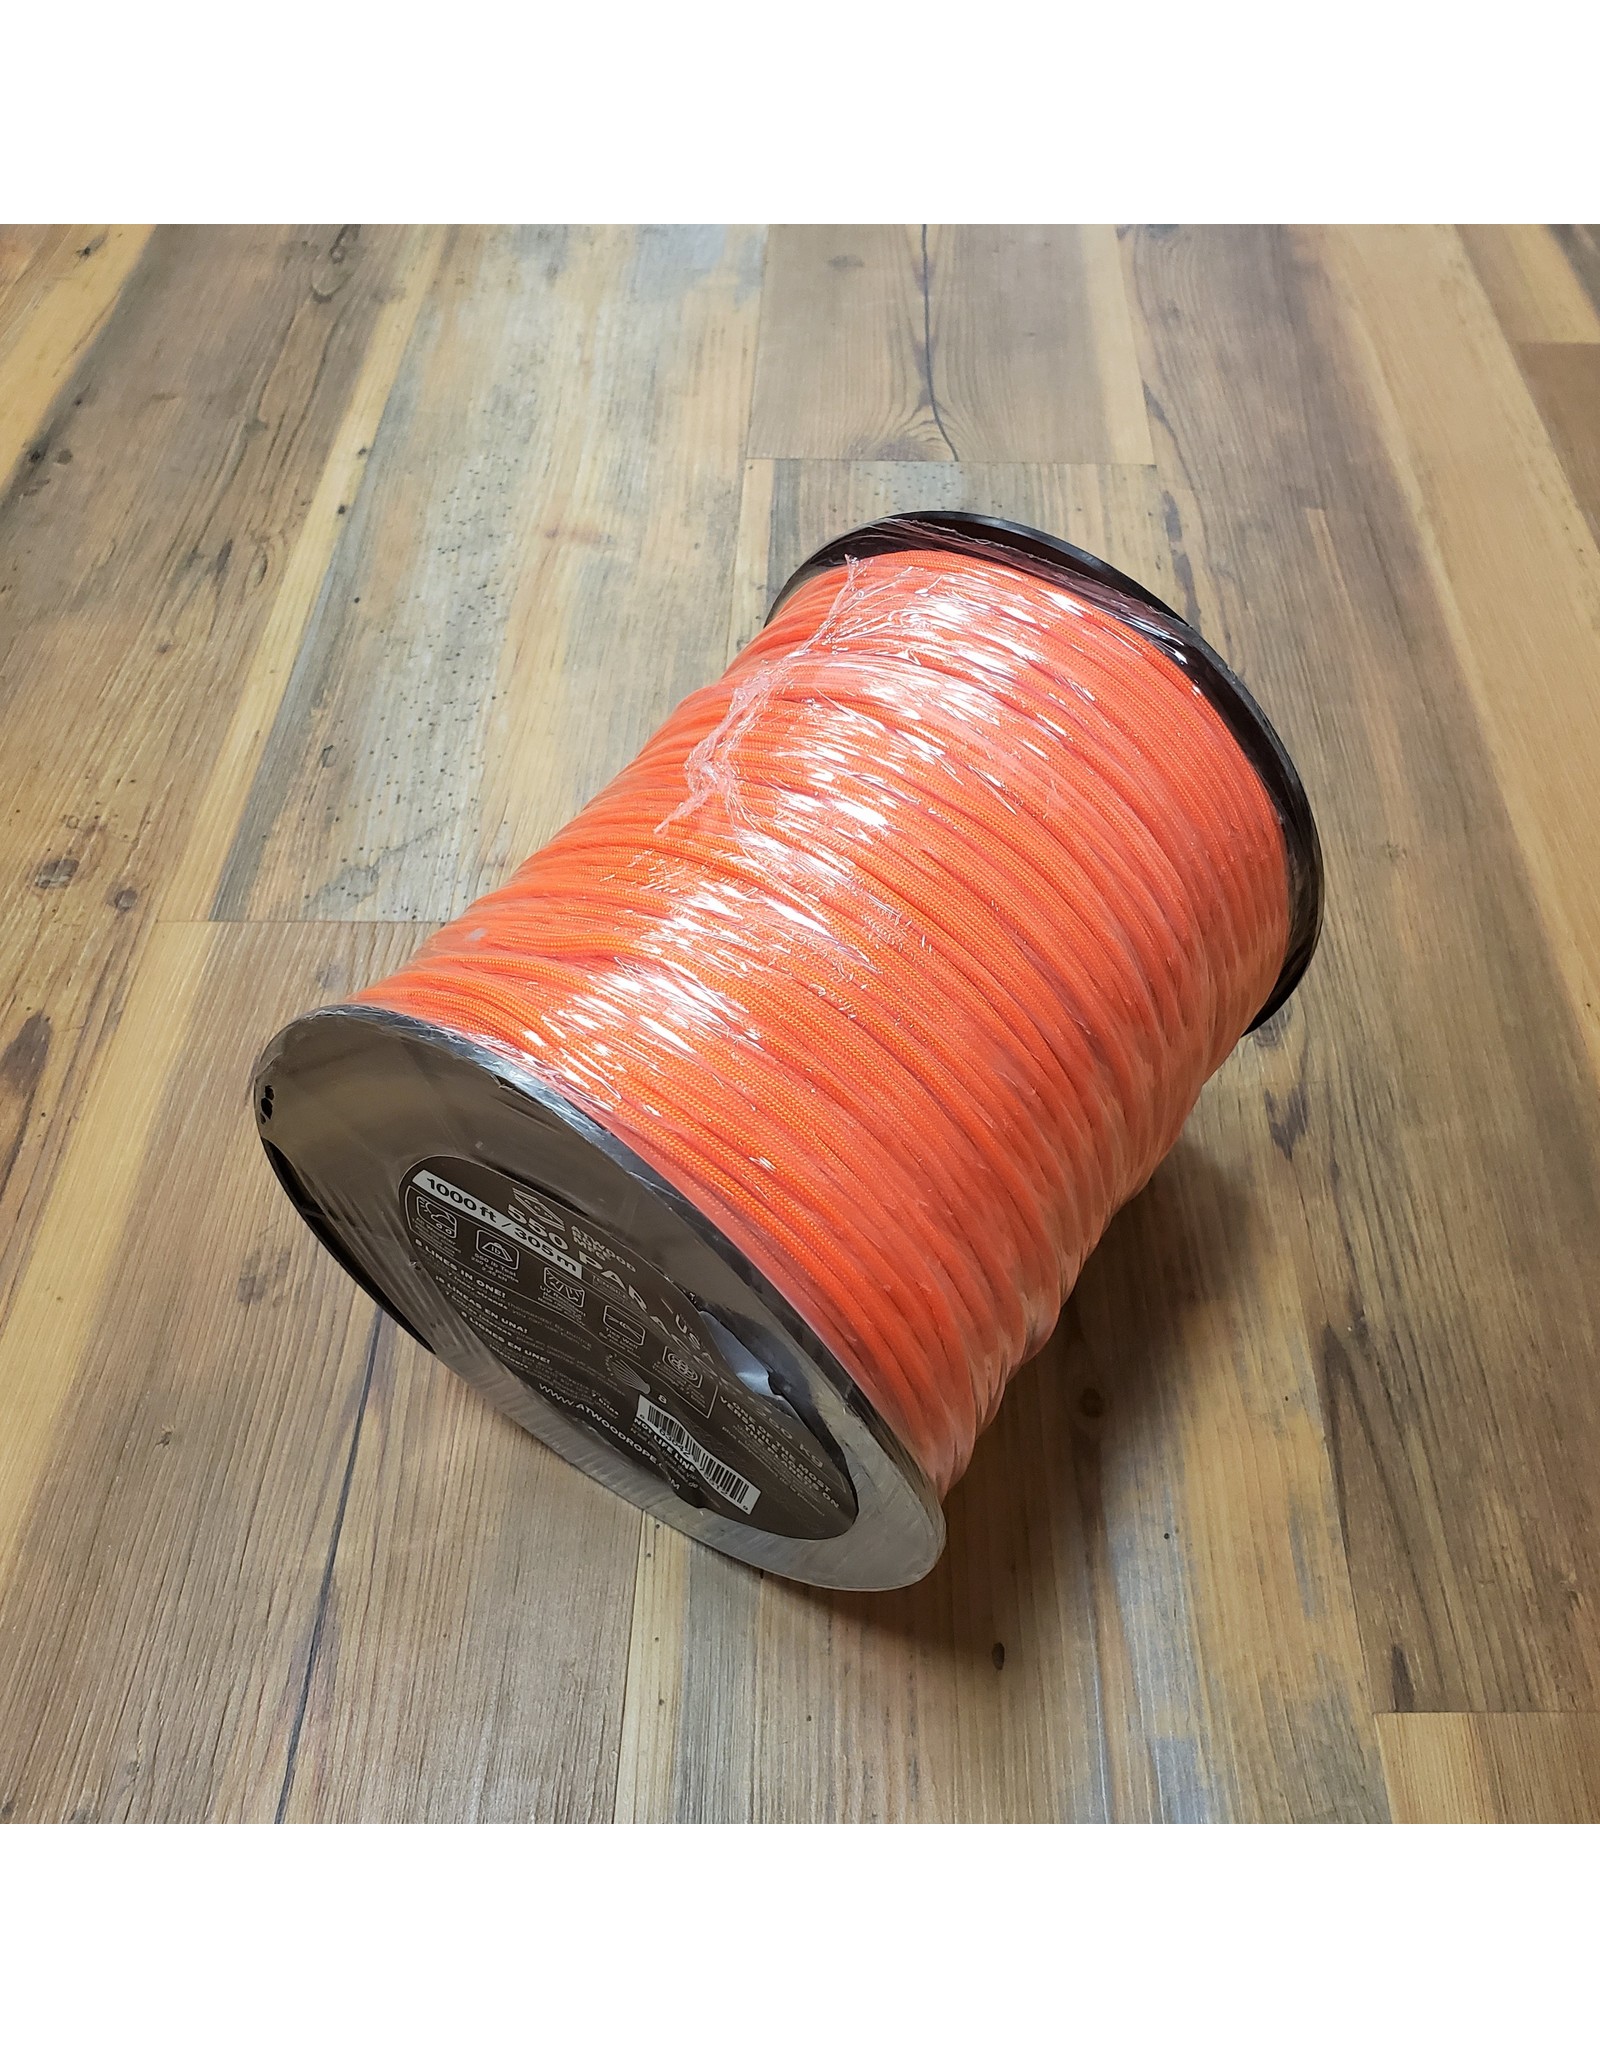 ATWOOD ROPE MFG 550 PARACORD 1000' SPOOL